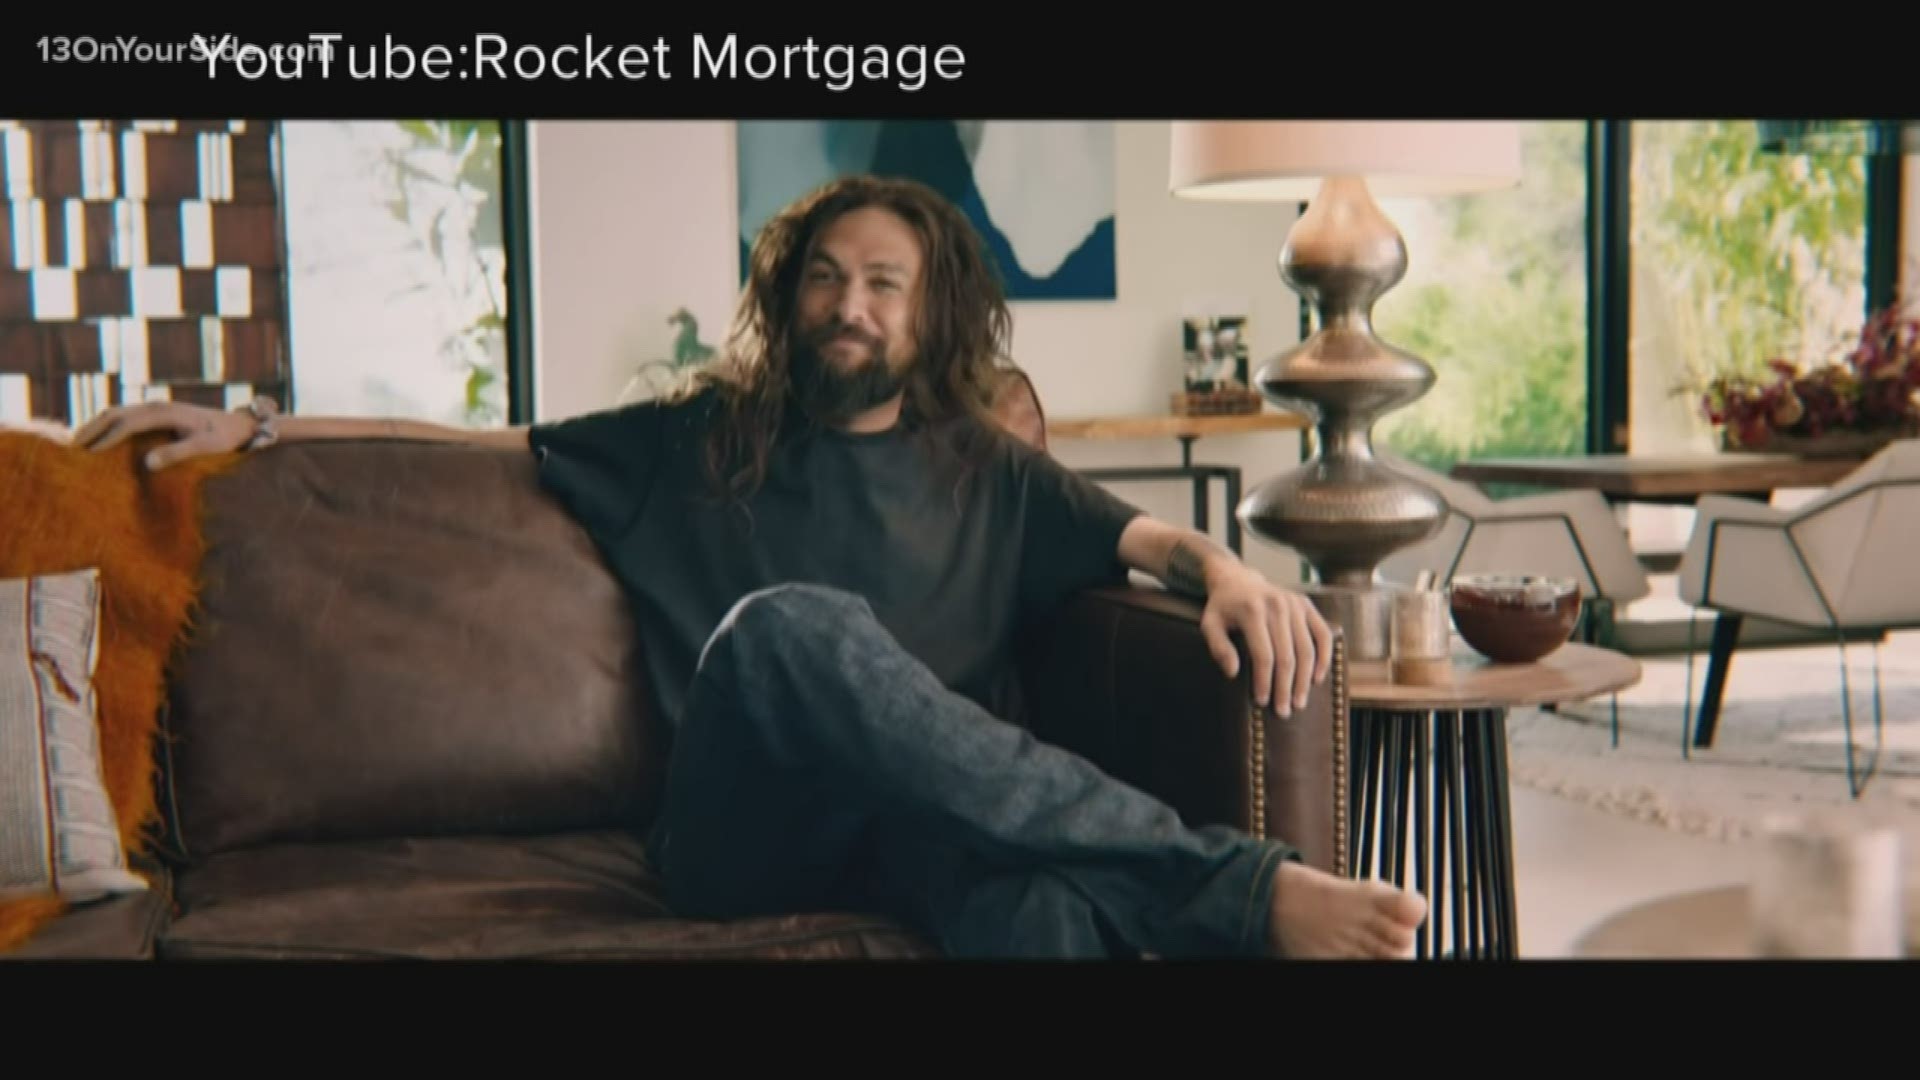 The Super Bowl is over, but many of us are still stuck on some of the commercials that debuted last night. My West Michigan gets a recap of all the ads Monday.